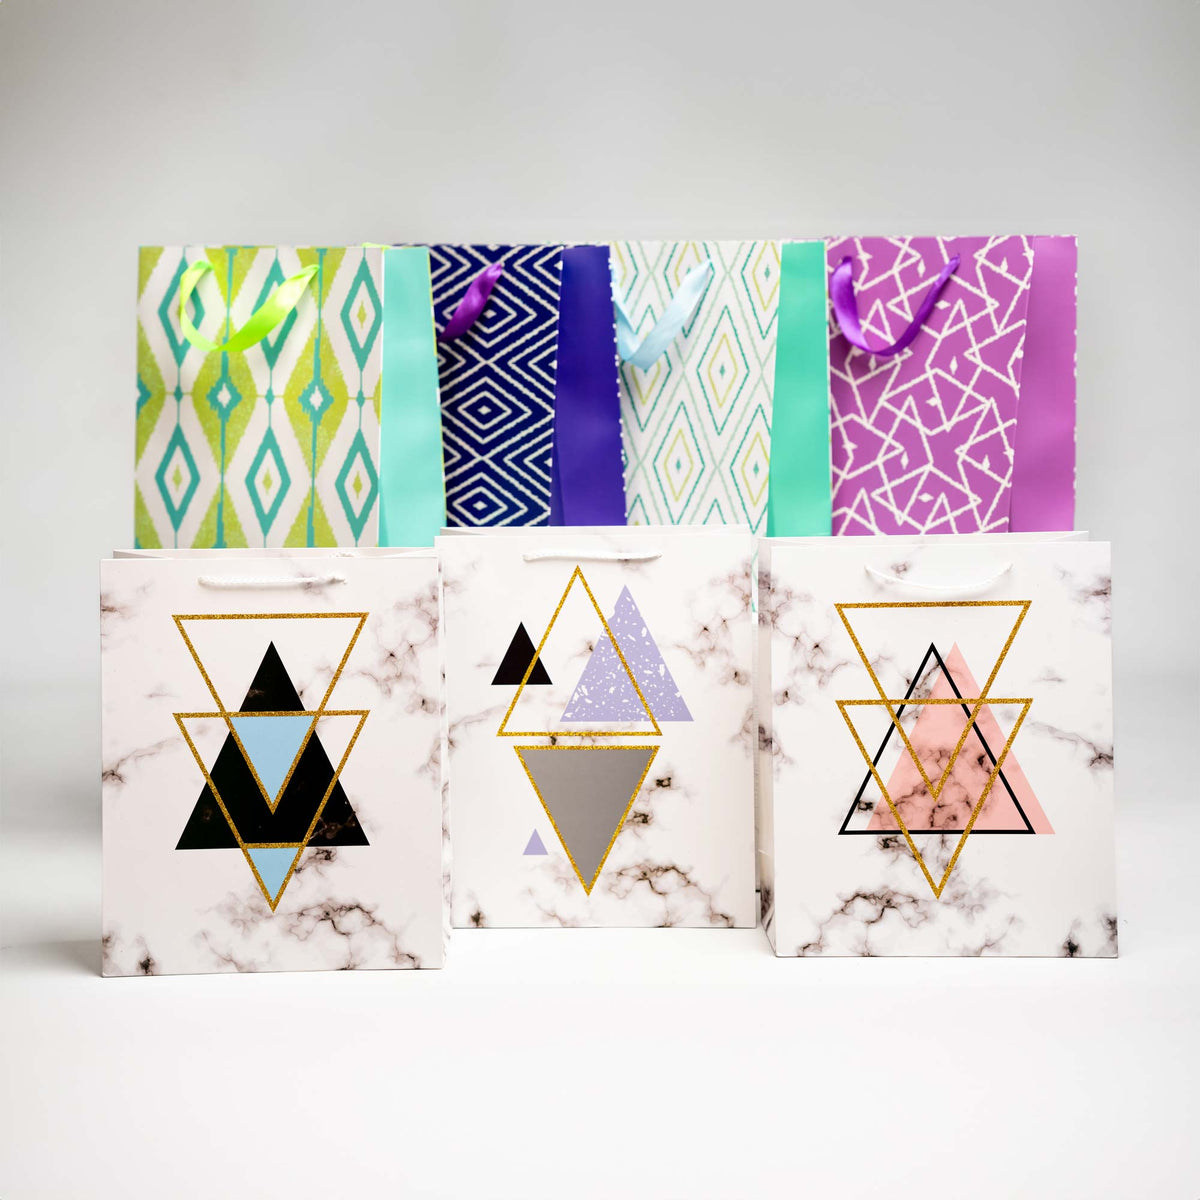 Marble Gift Bags With Geometric Patterns - Set Of 4, Assorted Designs (Sizes Available)